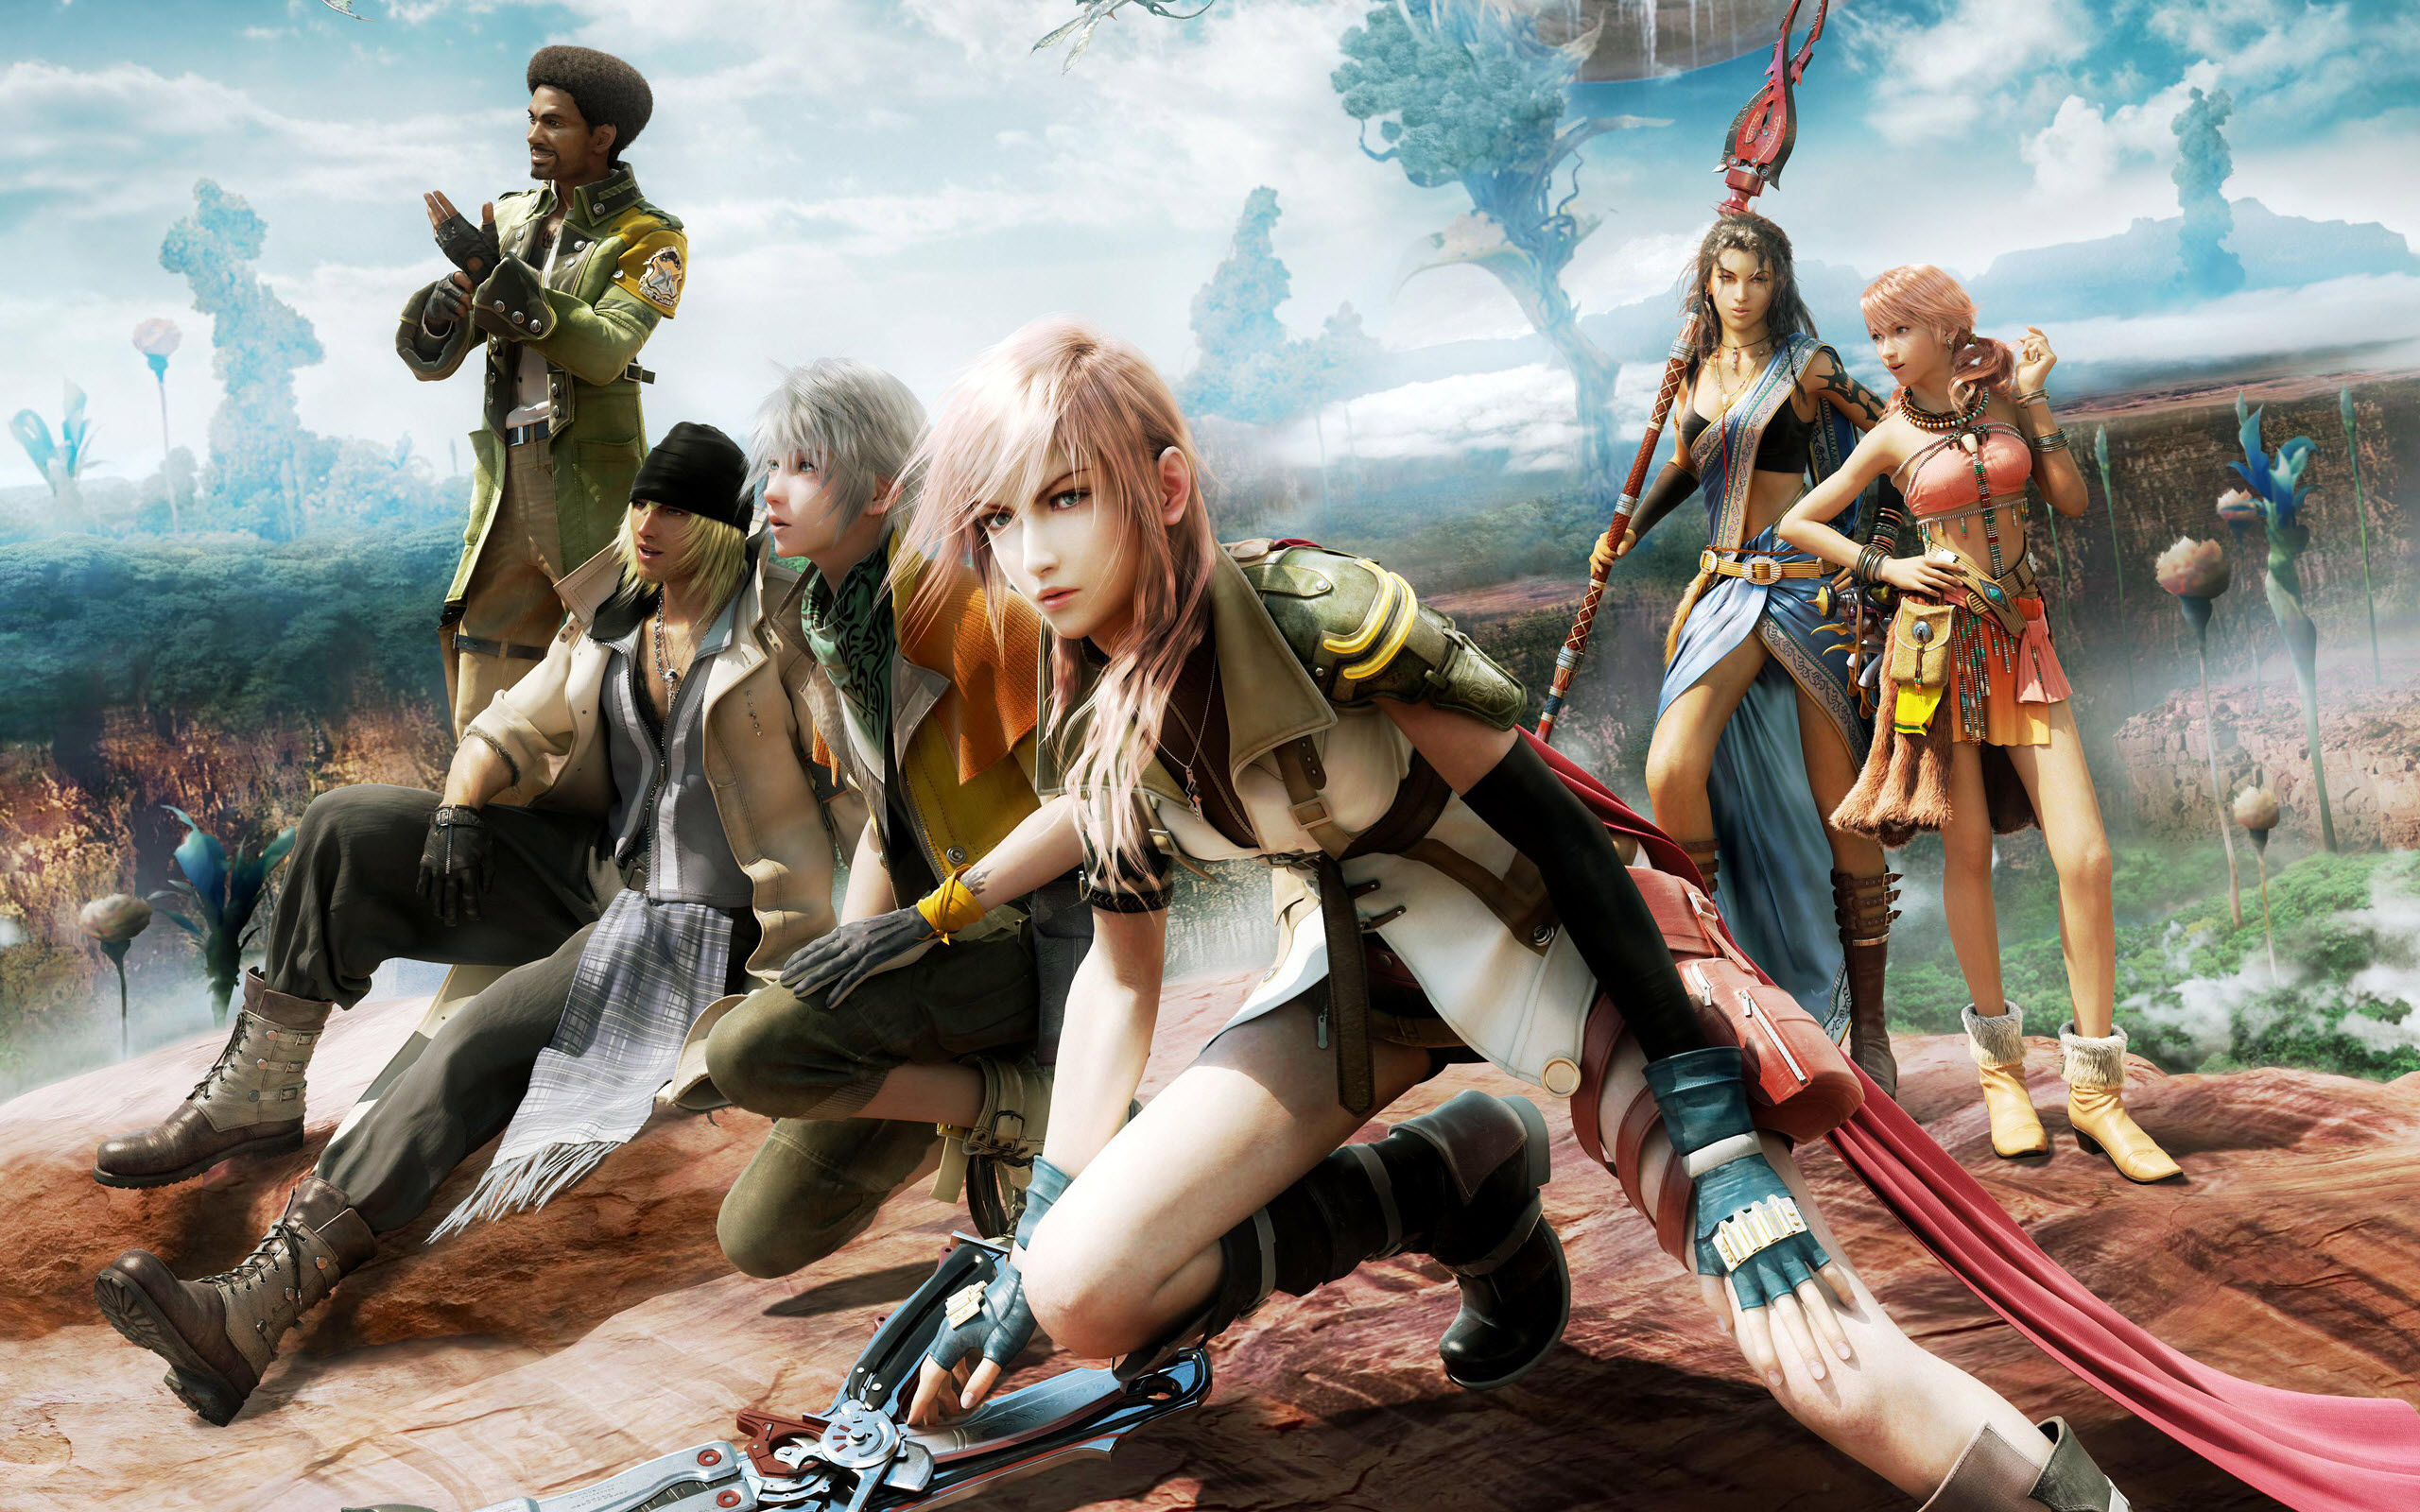 ff13 wallpaper,action adventure game,cg artwork,strategy video game,mythology,adventure game